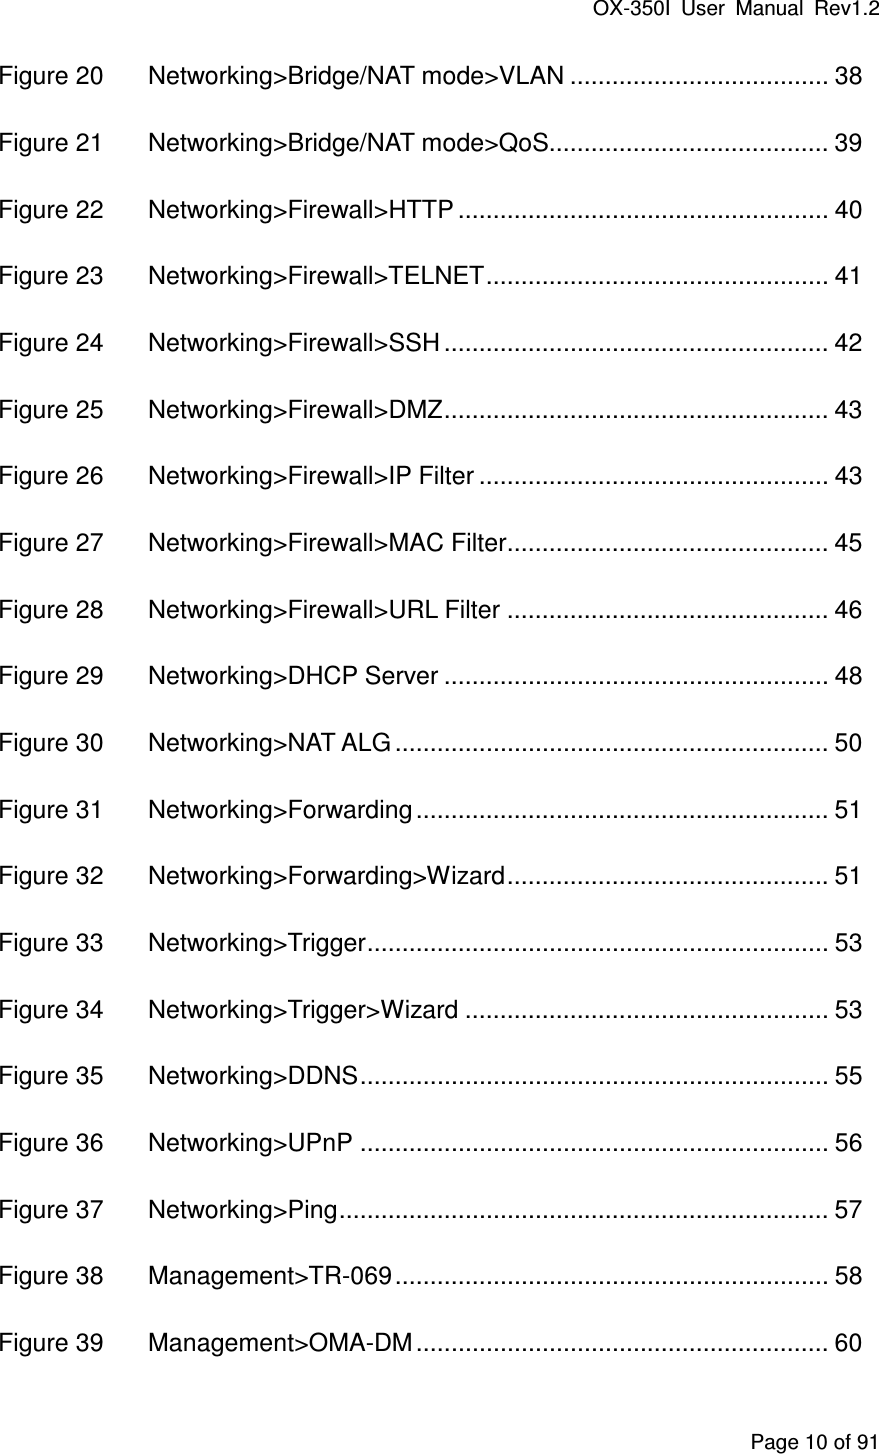 OX-350I  User  Manual  Rev1.2 Page 10 of 91 Figure 20 Networking&gt;Bridge/NAT mode&gt;VLAN ..................................... 38 Figure 21 Networking&gt;Bridge/NAT mode&gt;QoS........................................ 39 Figure 22 Networking&gt;Firewall&gt;HTTP ..................................................... 40 Figure 23 Networking&gt;Firewall&gt;TELNET ................................................. 41 Figure 24 Networking&gt;Firewall&gt;SSH ....................................................... 42 Figure 25 Networking&gt;Firewall&gt;DMZ ....................................................... 43 Figure 26 Networking&gt;Firewall&gt;IP Filter .................................................. 43 Figure 27 Networking&gt;Firewall&gt;MAC Filter .............................................. 45 Figure 28 Networking&gt;Firewall&gt;URL Filter .............................................. 46 Figure 29 Networking&gt;DHCP Server ....................................................... 48 Figure 30 Networking&gt;NAT ALG .............................................................. 50 Figure 31 Networking&gt;Forwarding ........................................................... 51 Figure 32 Networking&gt;Forwarding&gt;Wizard .............................................. 51 Figure 33 Networking&gt;Trigger .................................................................. 53 Figure 34 Networking&gt;Trigger&gt;Wizard .................................................... 53 Figure 35 Networking&gt;DDNS ................................................................... 55 Figure 36 Networking&gt;UPnP ................................................................... 56 Figure 37 Networking&gt;Ping ...................................................................... 57 Figure 38 Management&gt;TR-069 .............................................................. 58 Figure 39 Management&gt;OMA-DM ........................................................... 60 